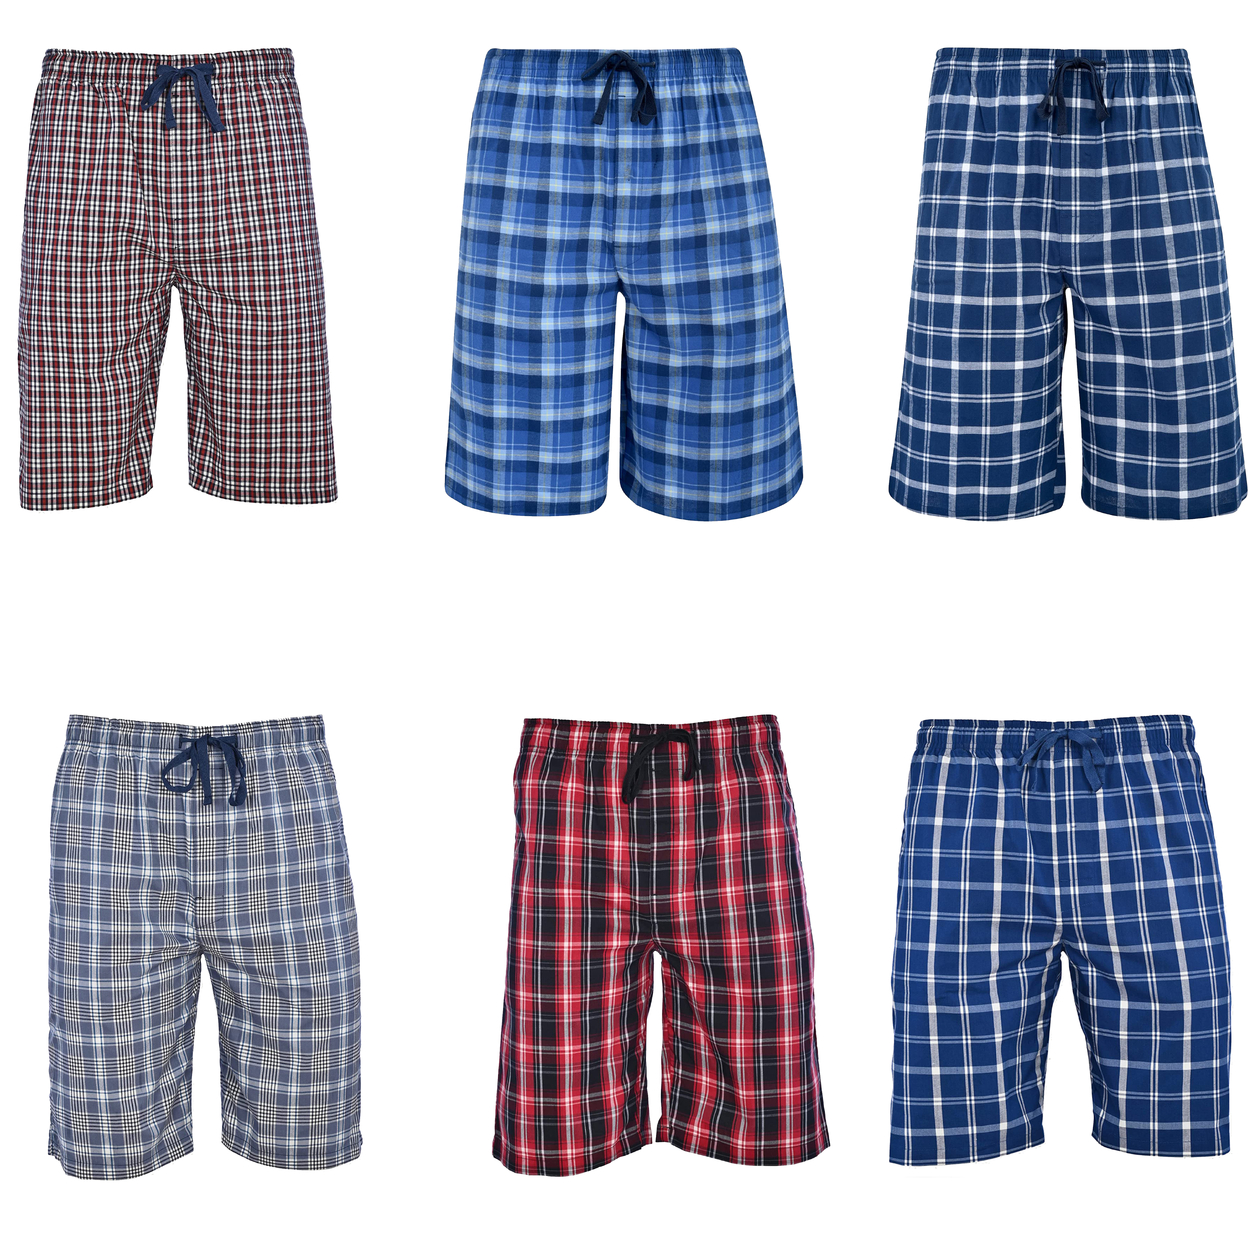 2-Pack: Men's Ultra Soft Plaid Lounge Pajama Sleep Wear Shorts - Red& Red, Large